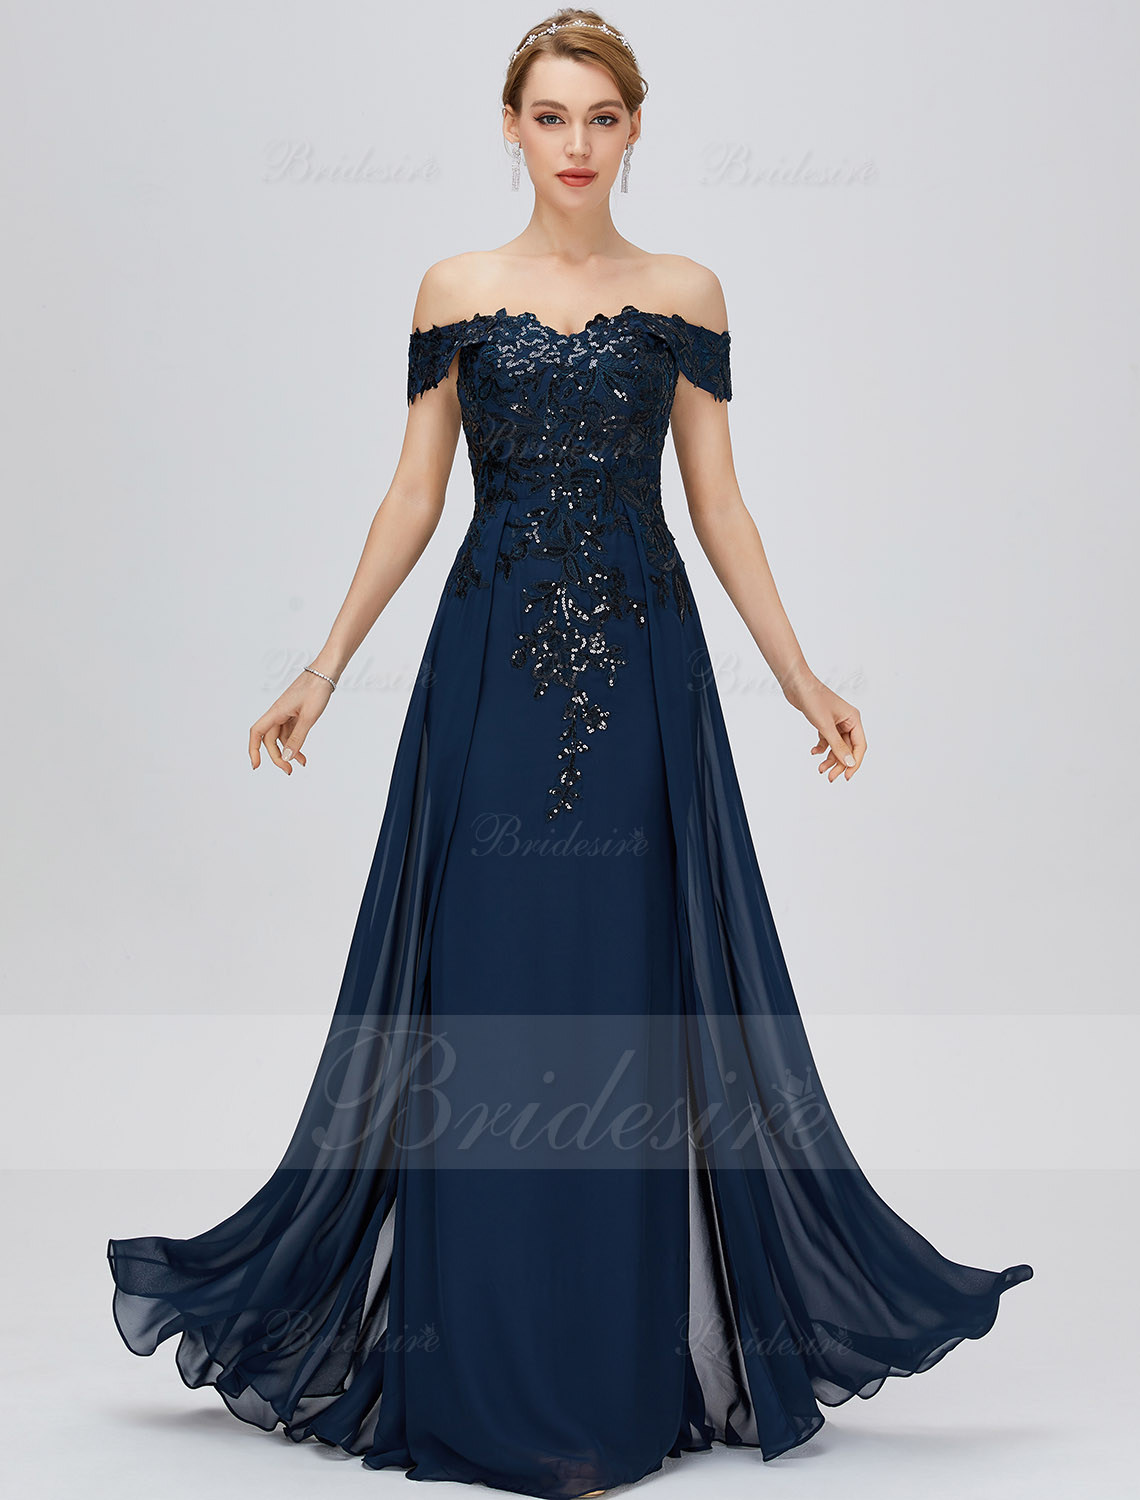 Sheath/Column Off-the-shoulder Floor-length Chiffon Evening Dress with Lace